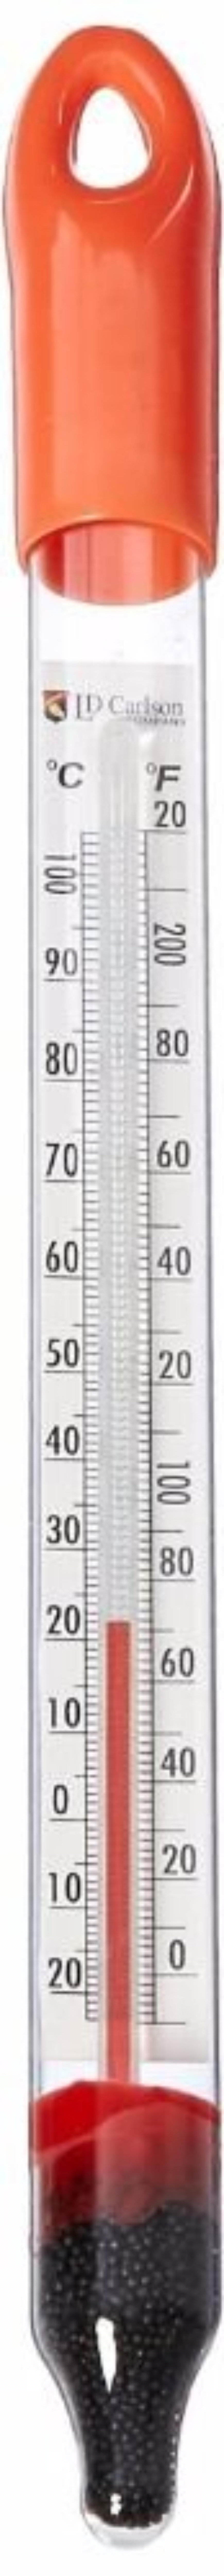 8 Inch Floating Glass Thermometer 